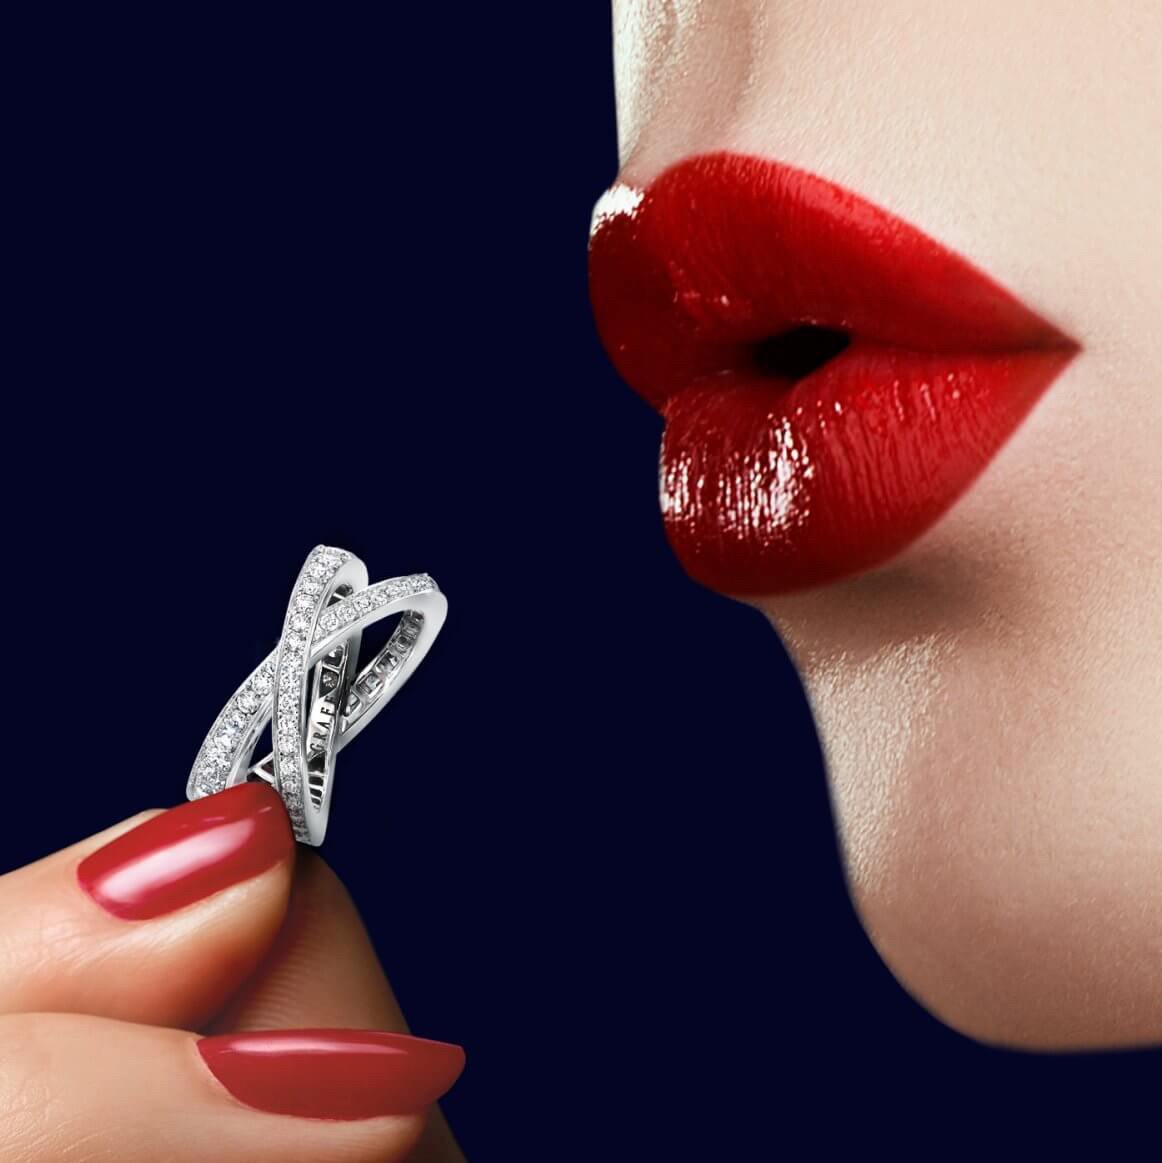 Model holding Kiss Pavé Diamond Ring from the Graff jewellery collection